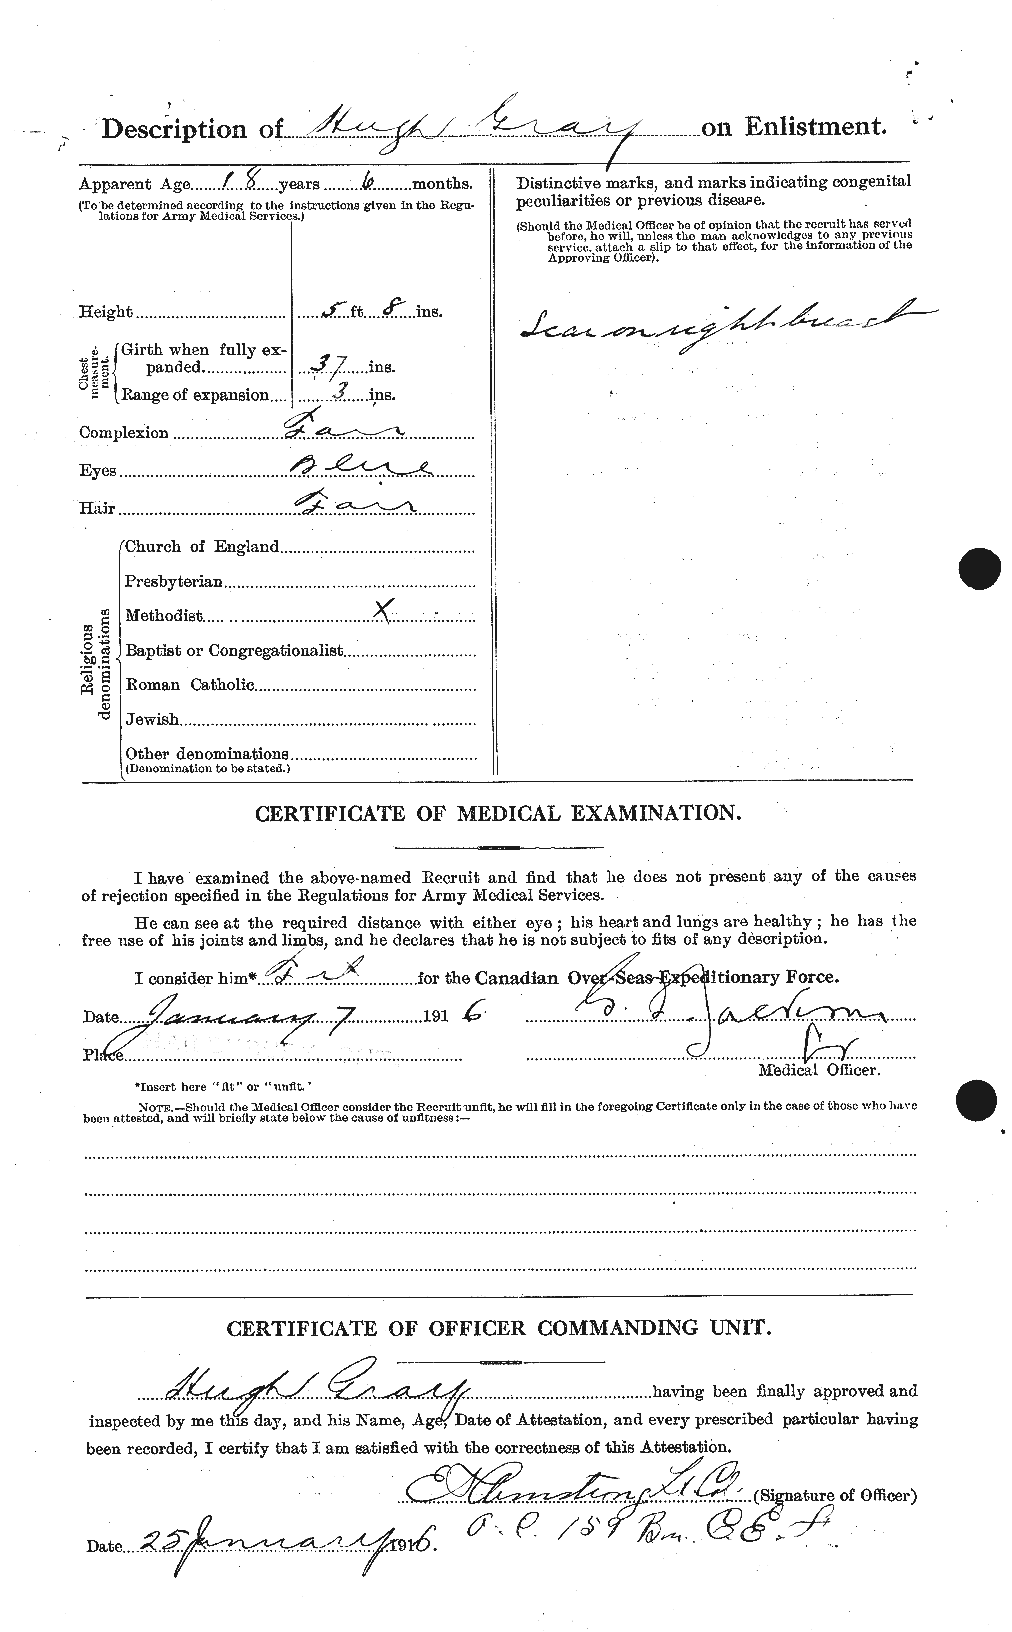 Personnel Records of the First World War - CEF 363254b